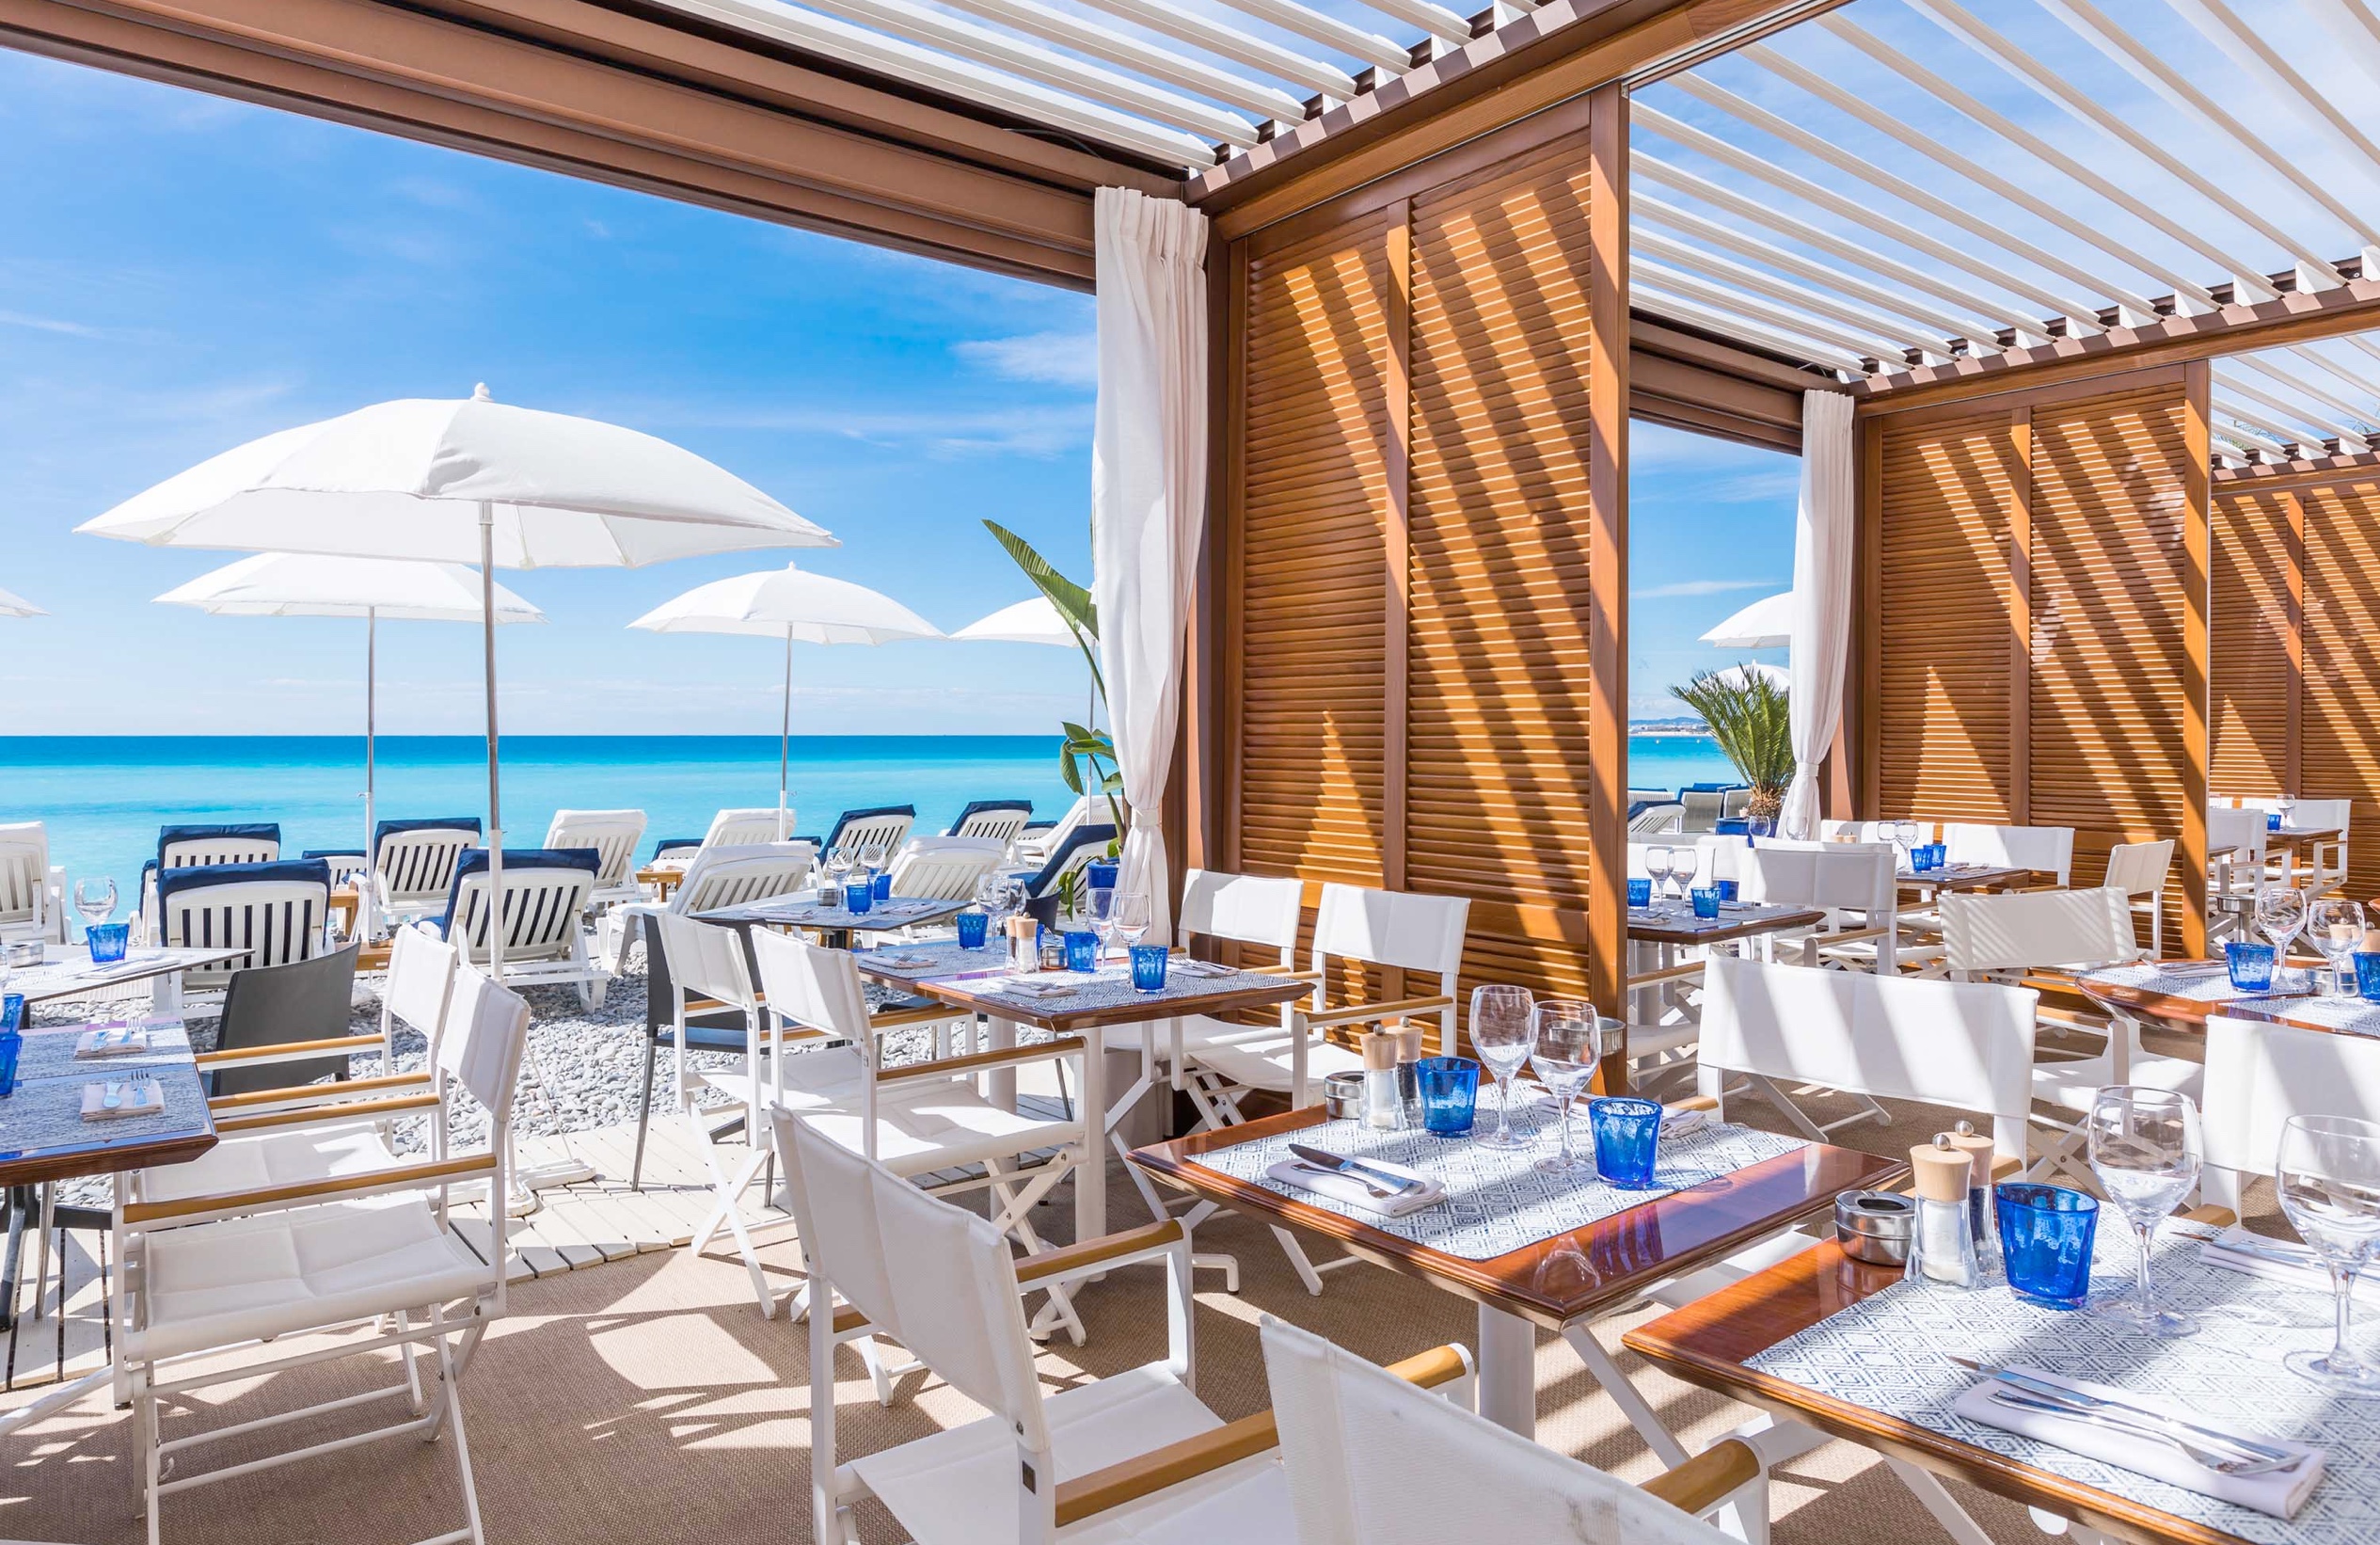 Discover the beach restaurant le galet in Nice.